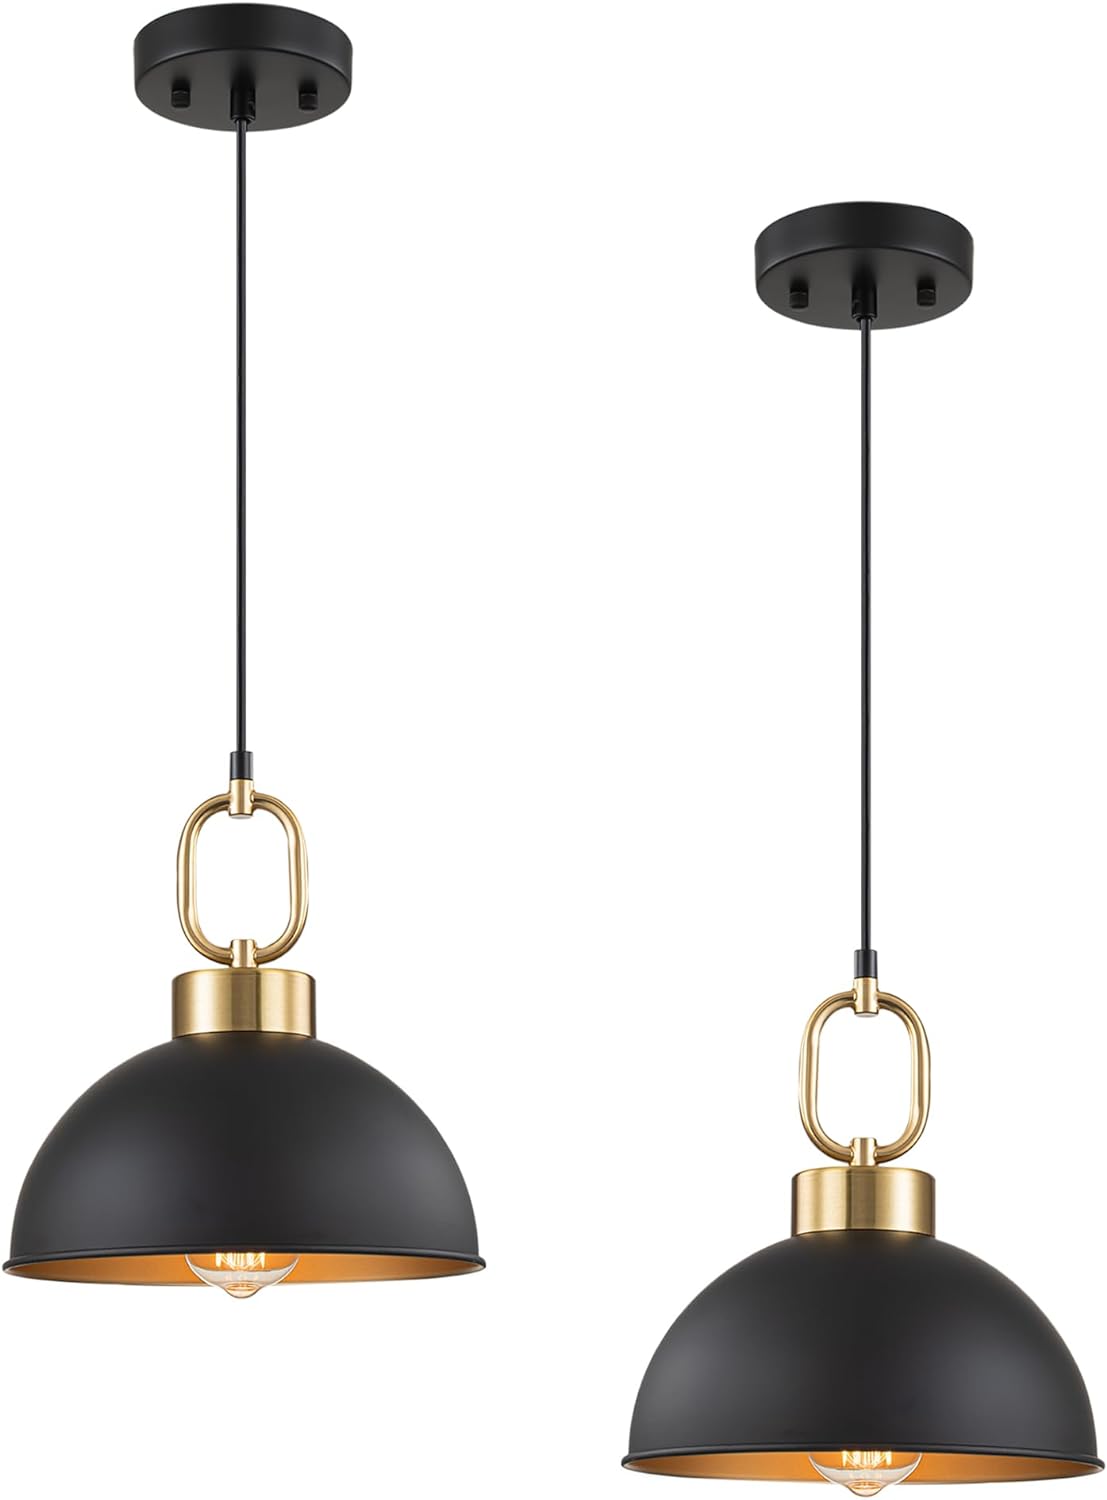 This is a very good looking light fixture. It' less than a foot across though, so make sure to take that into consideration when placing it. The brass and black go with so many decors, and pretty easy to install.